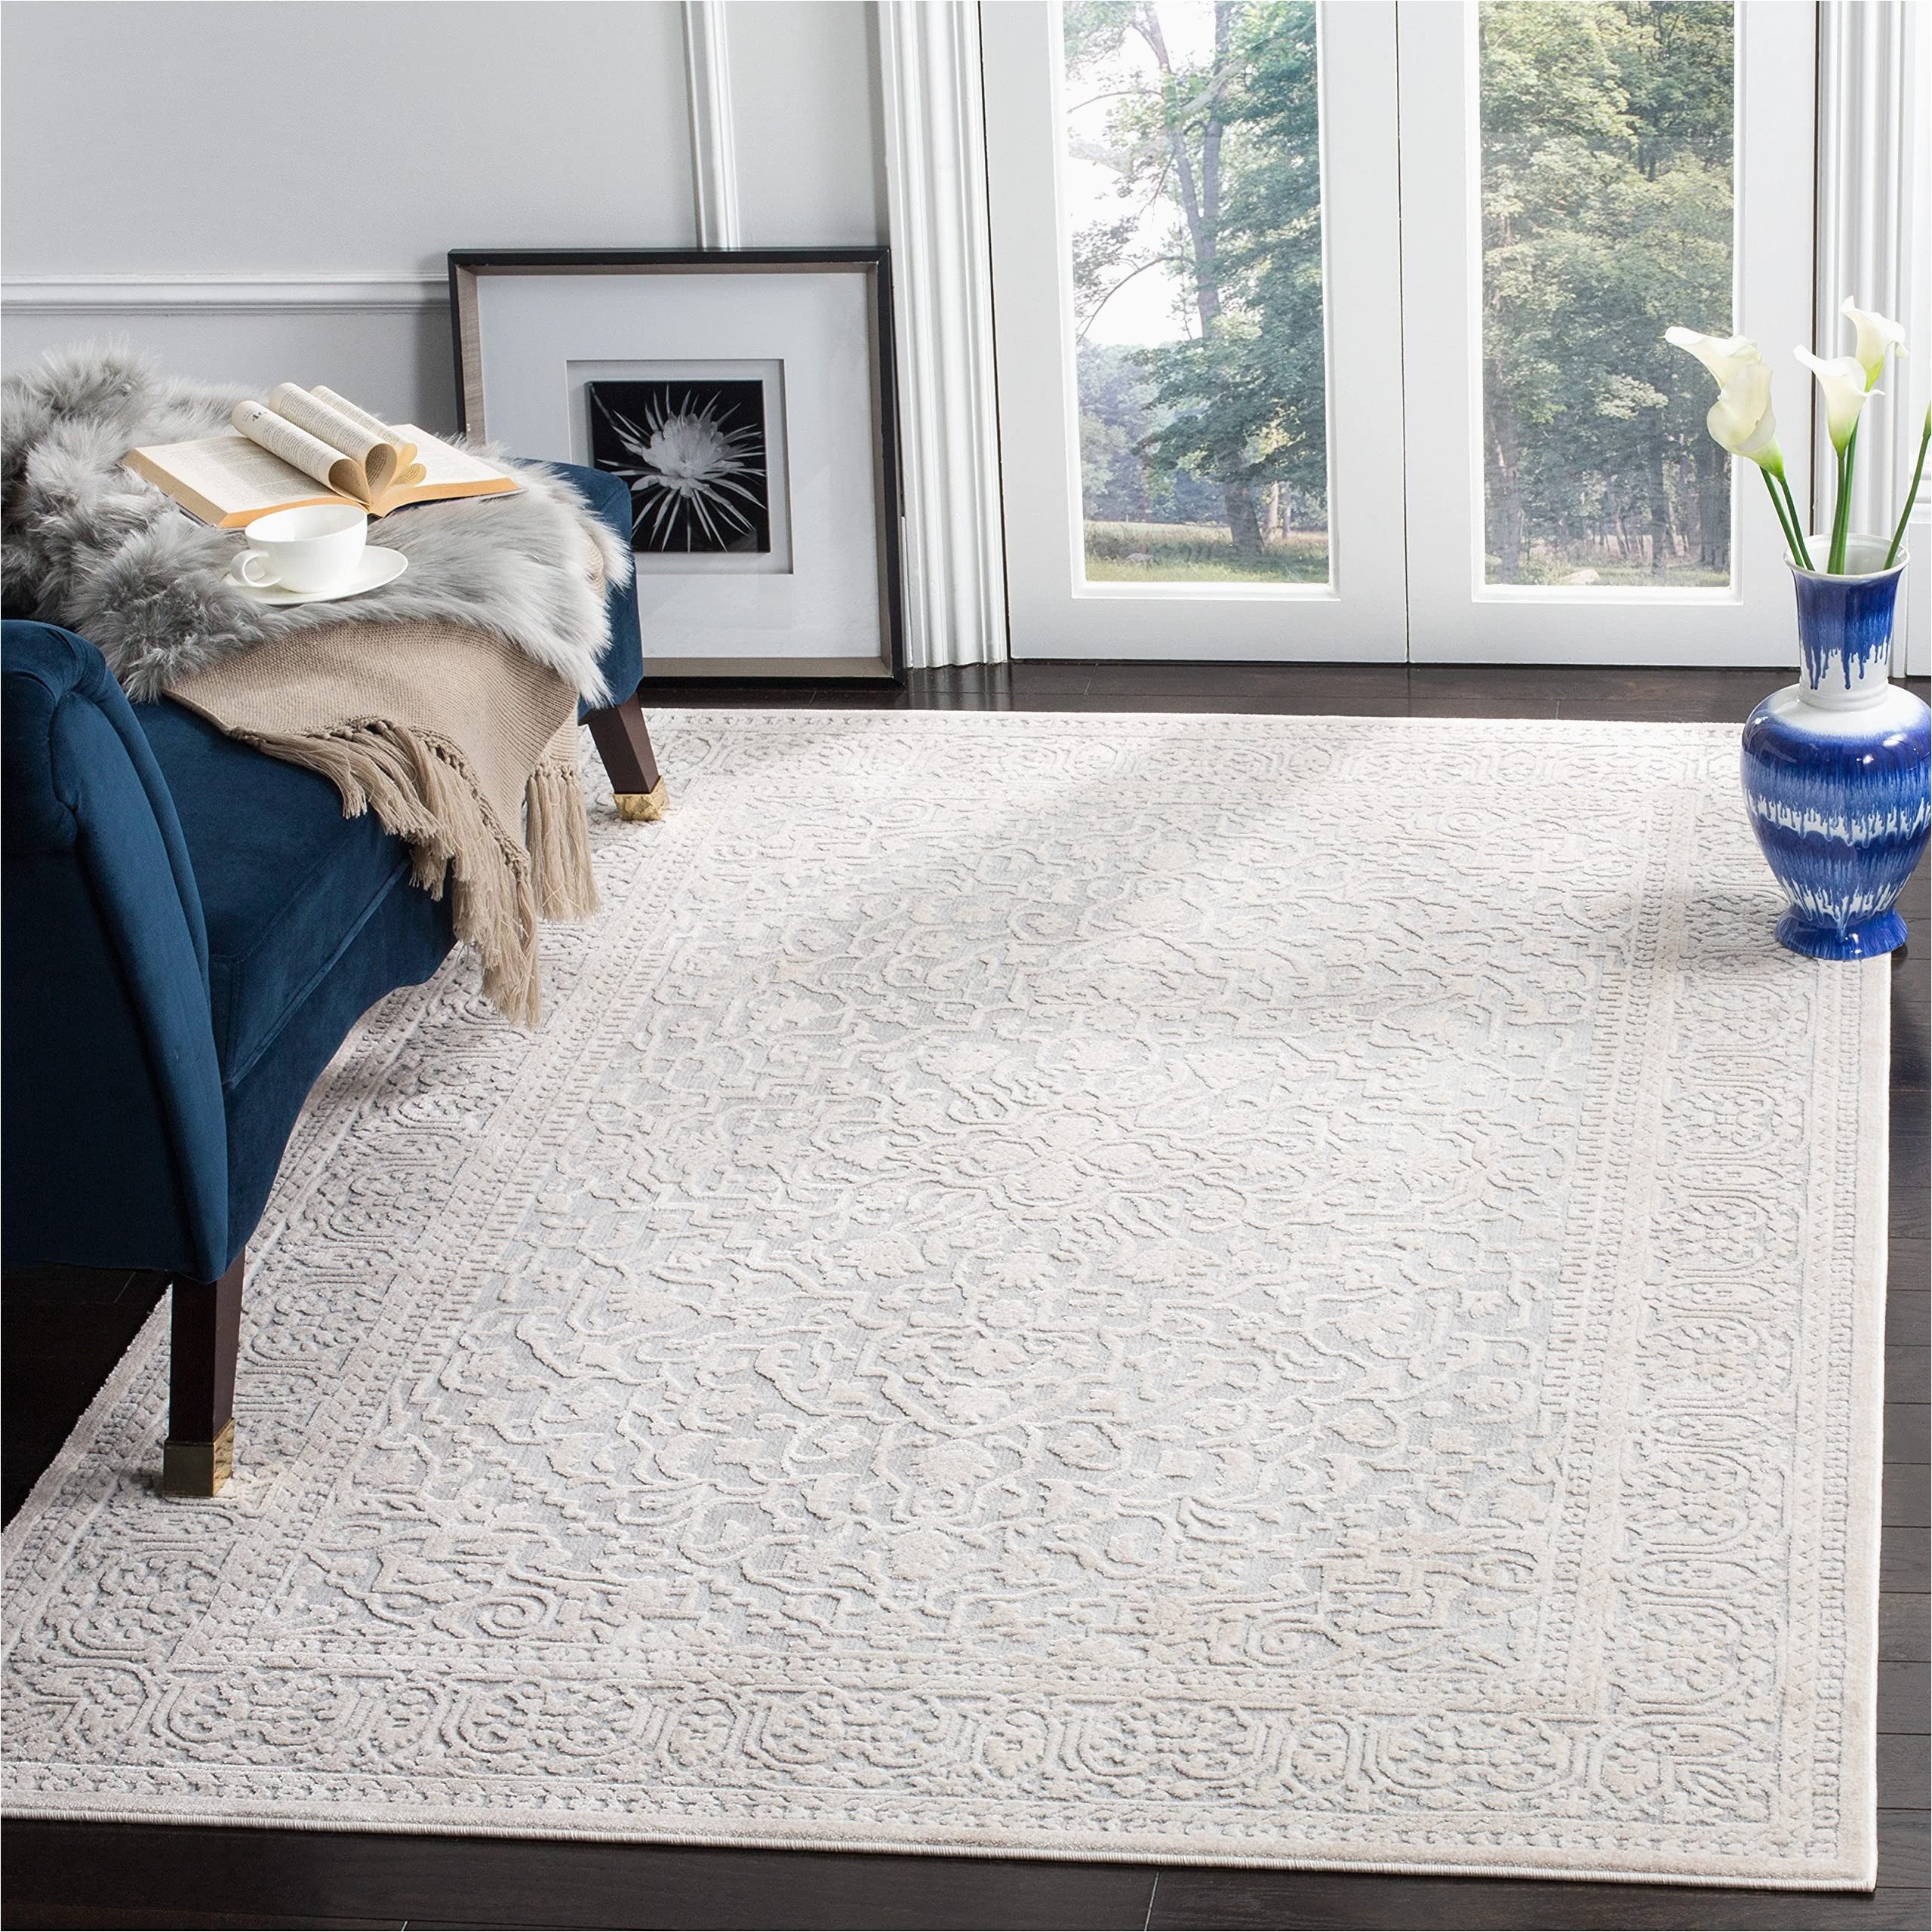 Grey Cream and Blue area Rugs Safavieh Reflection Collection 10′ X 14′ Light Grey/cream Rft670c Vintage Distressed area Rug